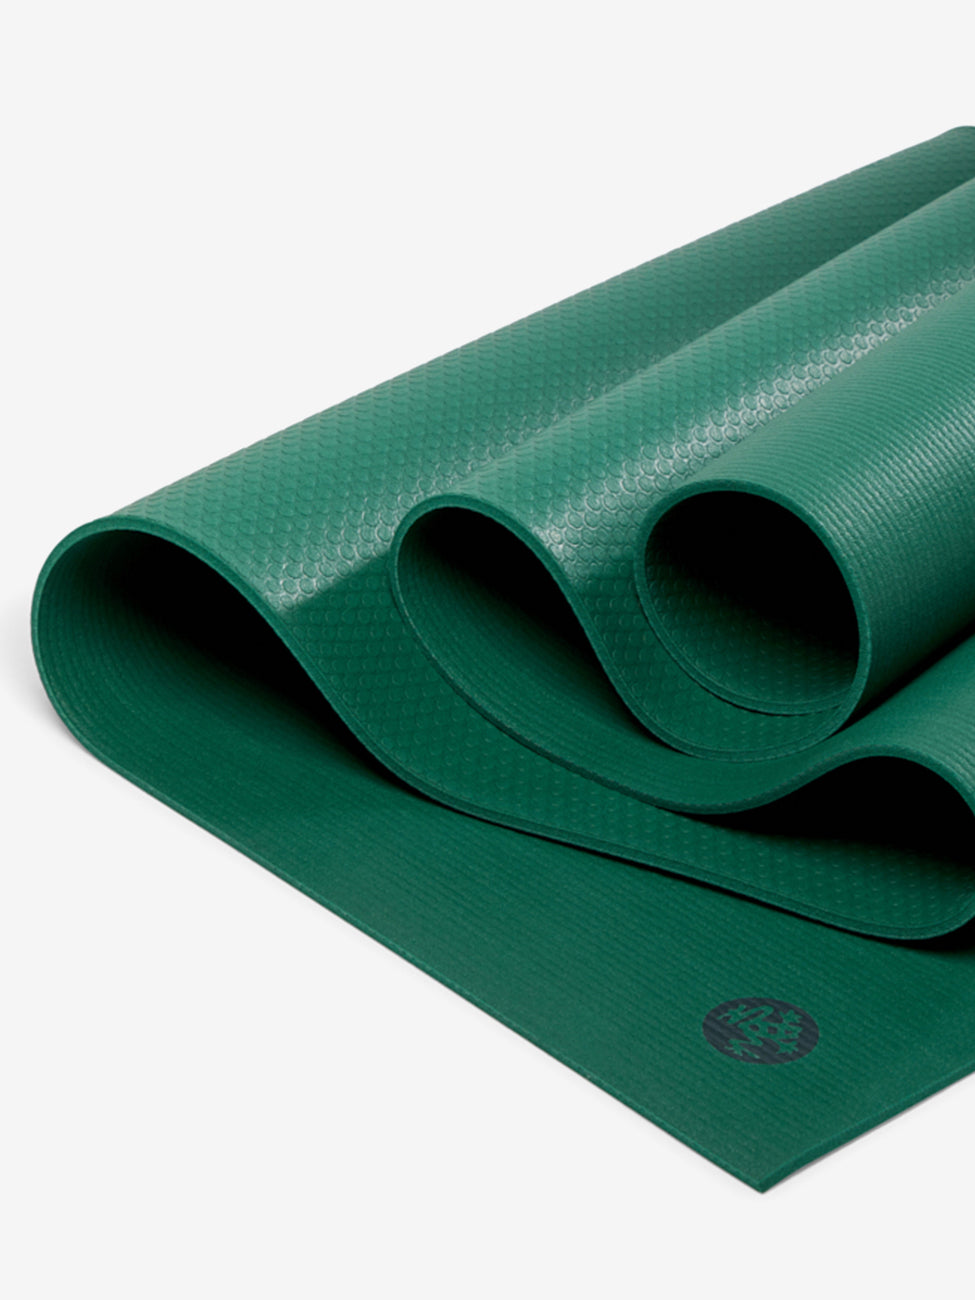 Green textured yoga mat partially rolled with visible logo, eco-friendly non-slip surface, photographed from above.